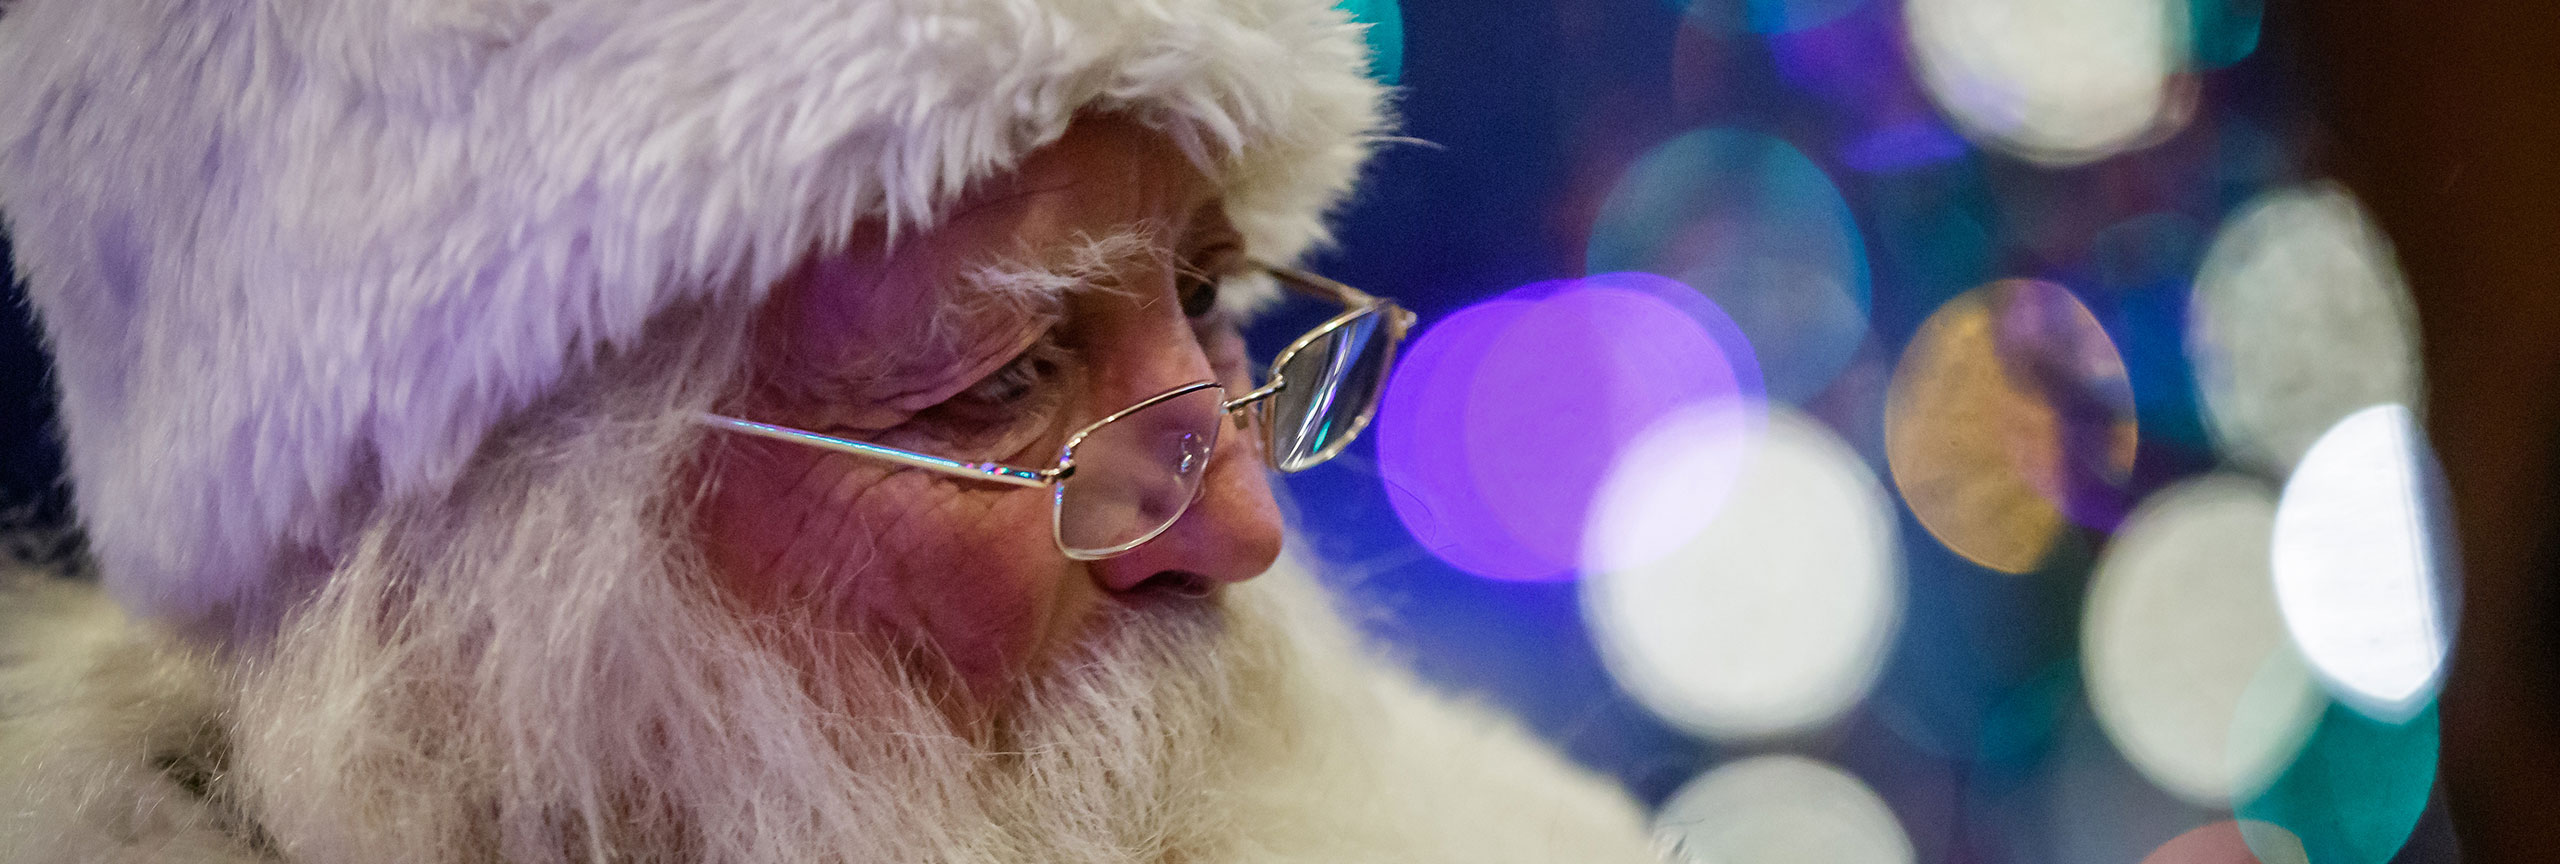 Closeup of Santa Clause with holiday lights in the background.